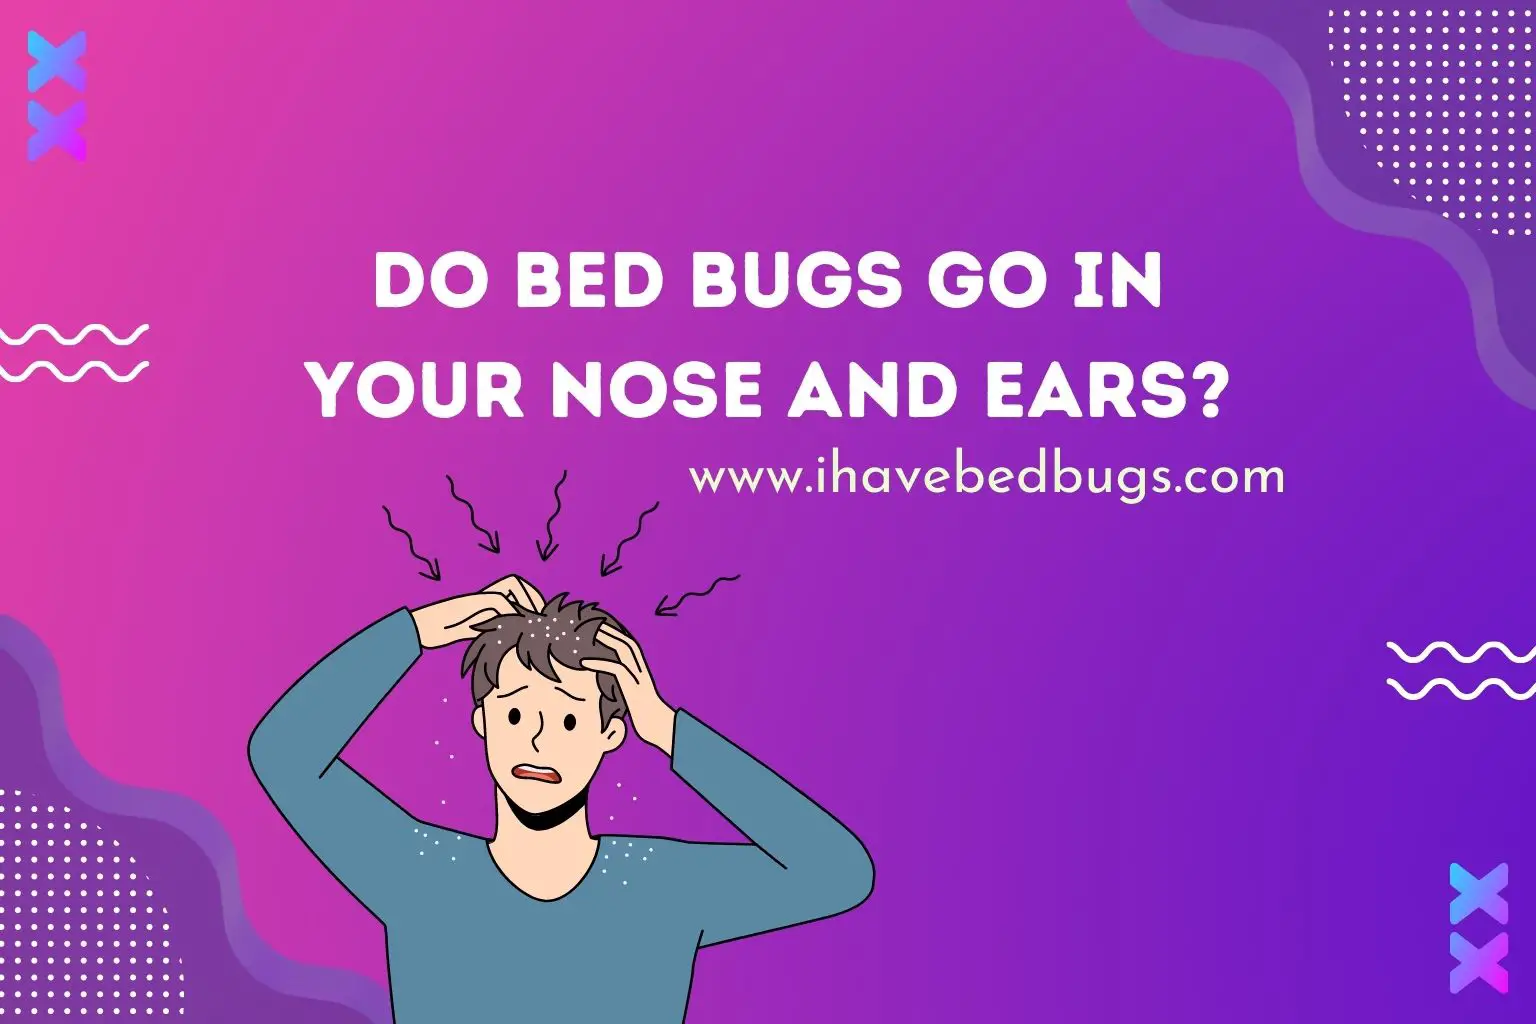 Do bed bugs go in your nose and ears